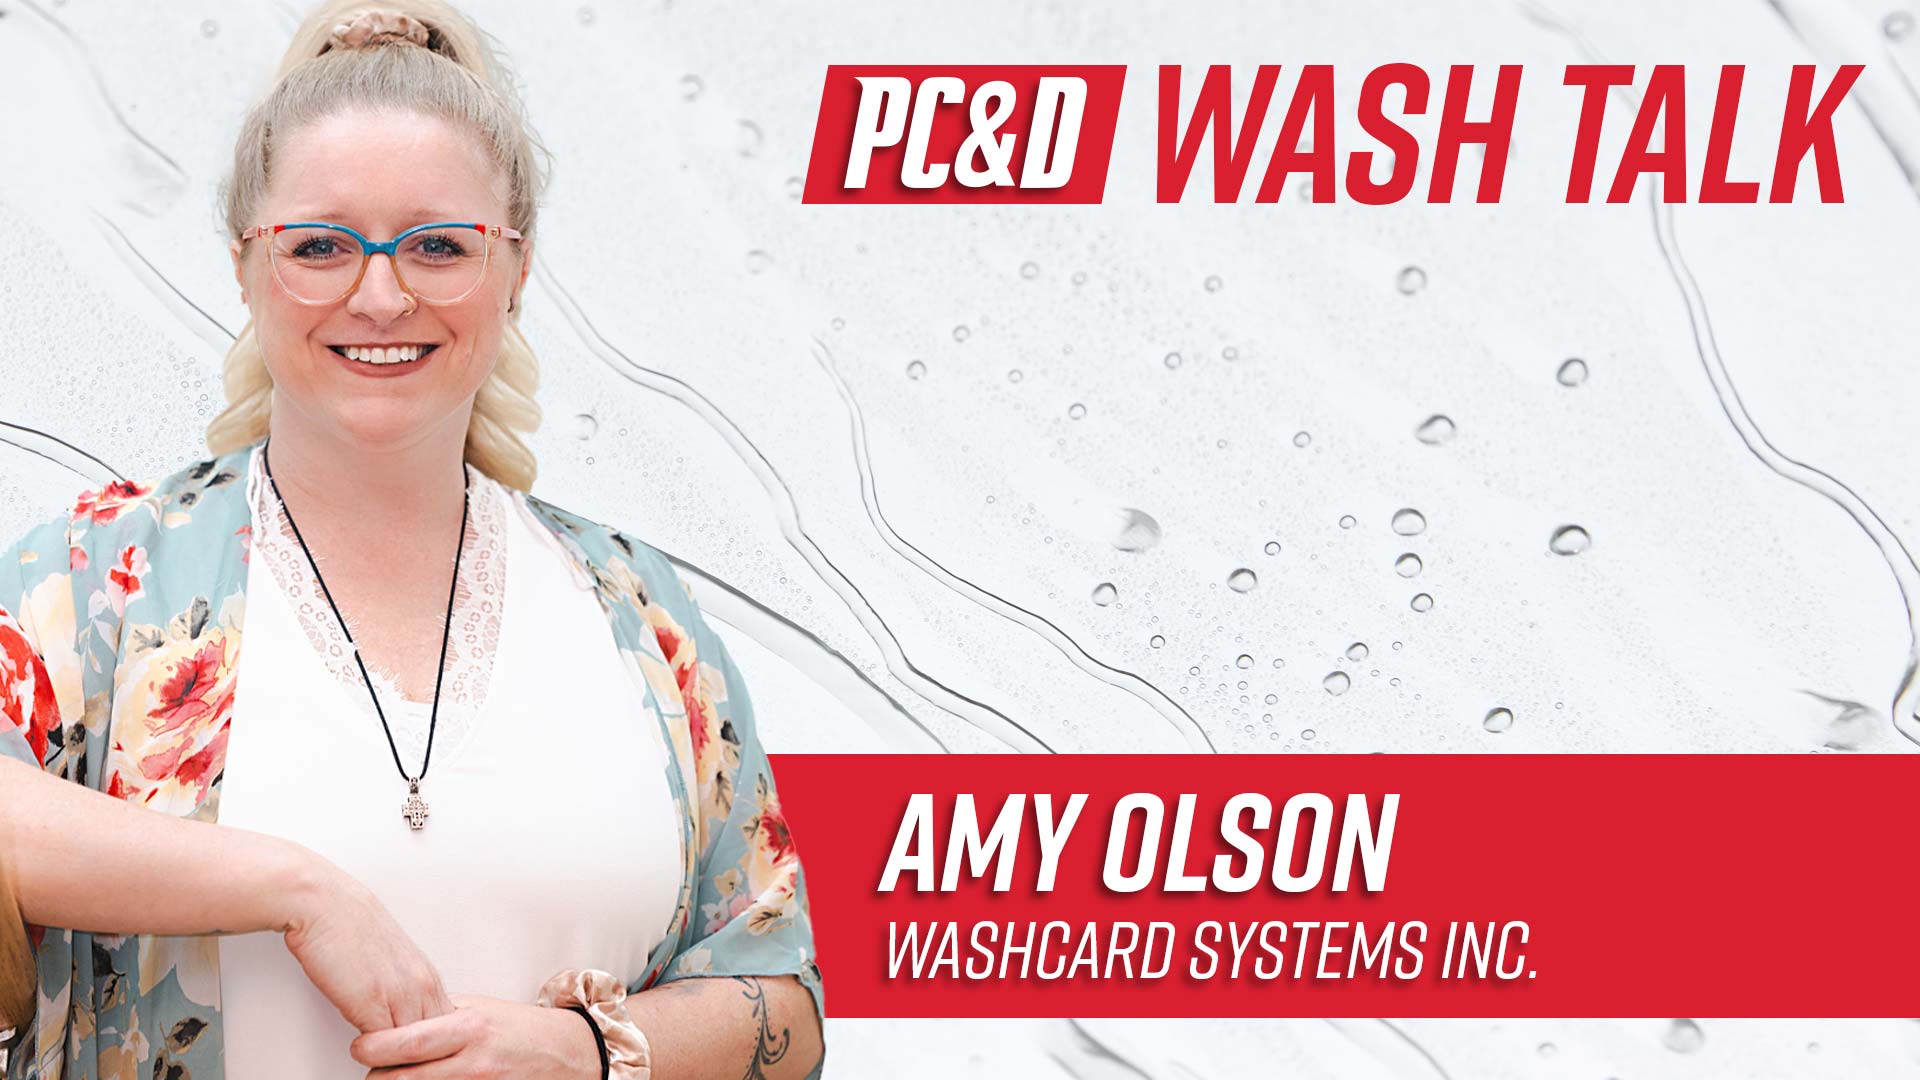 Amy Olson from WashCard Systems